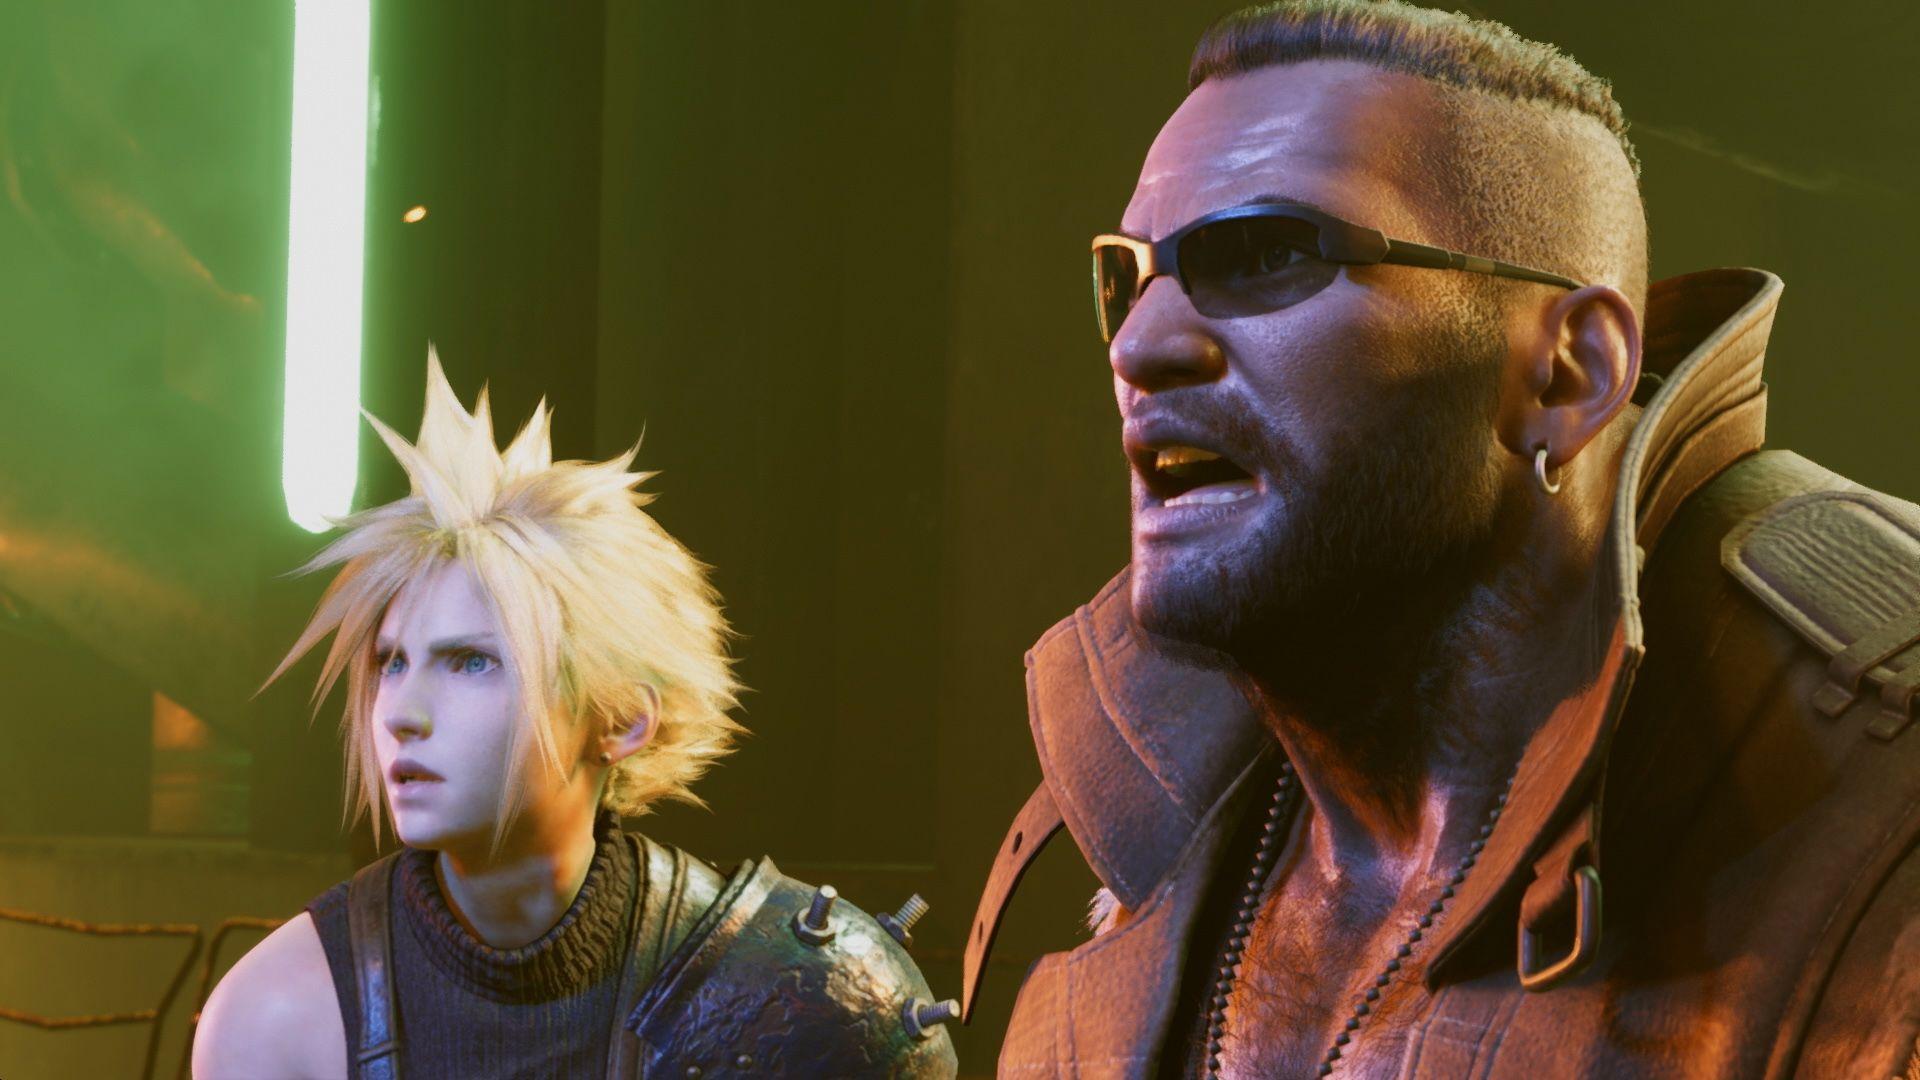 Final Fantasy VII Remake' demo expected, according to PSN tracking